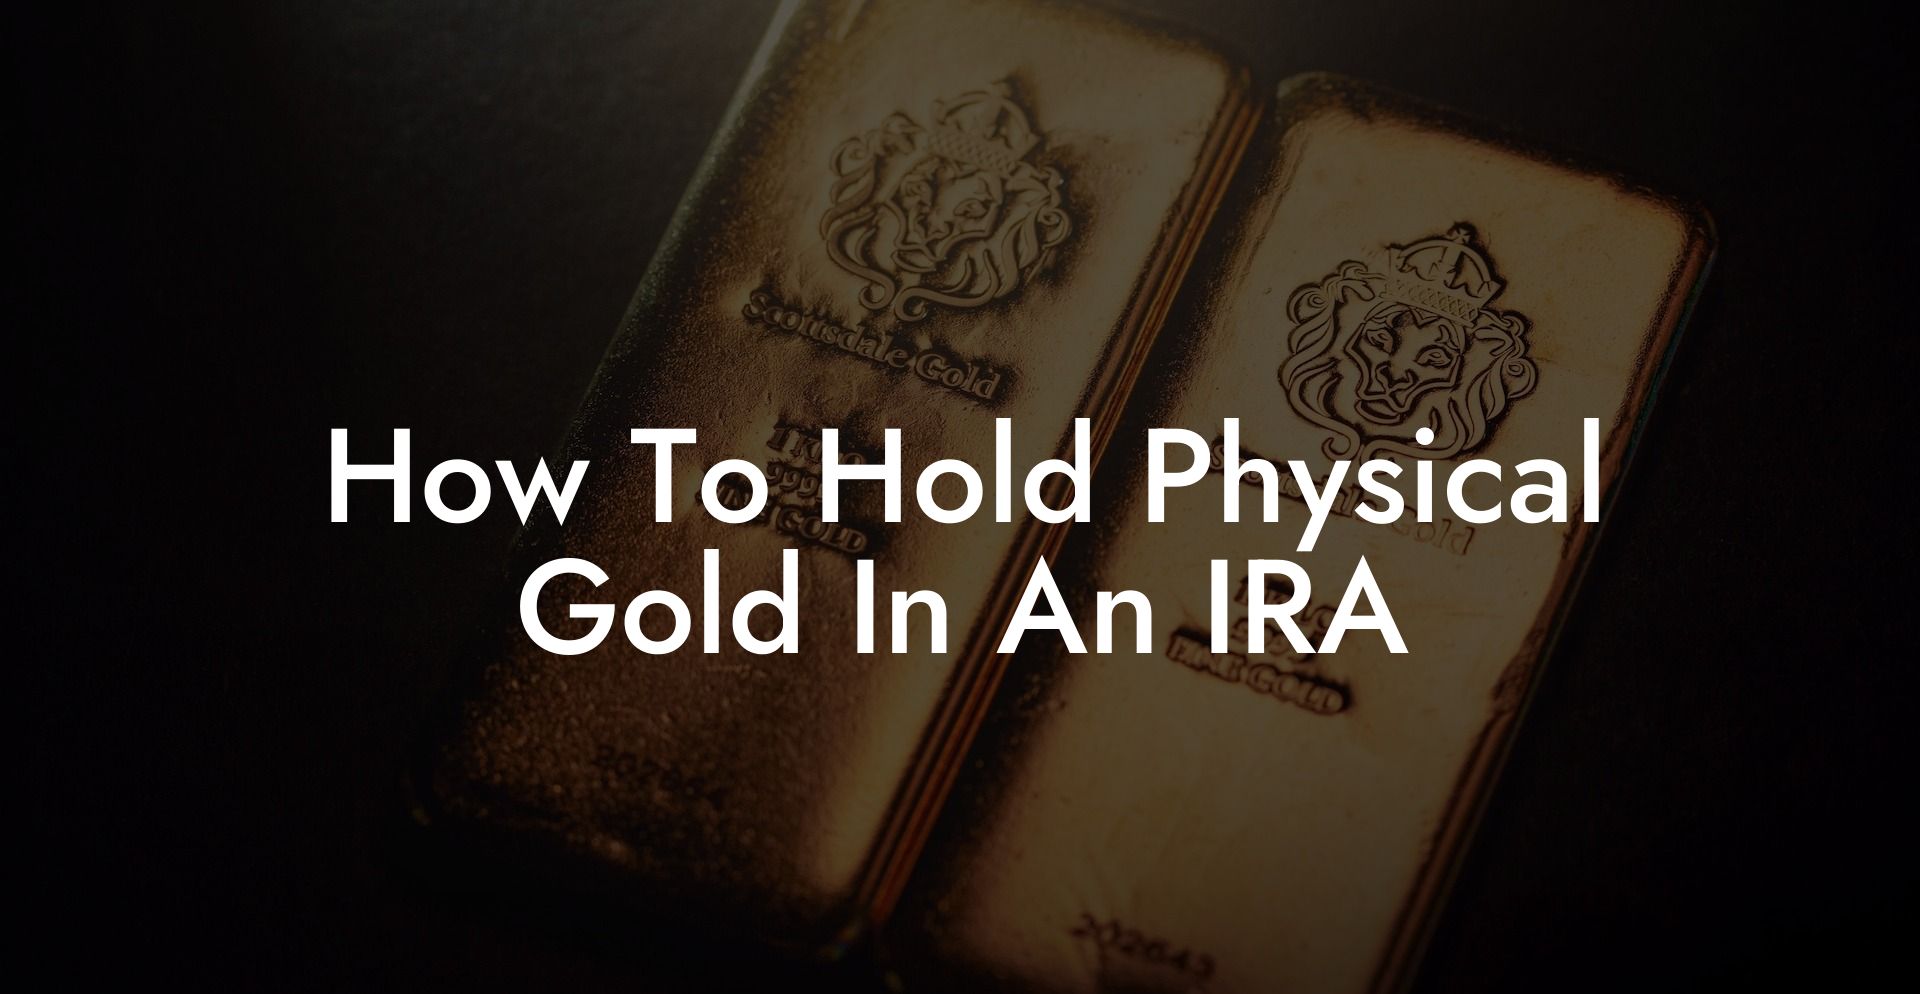 How To Hold Physical Gold In An IRA